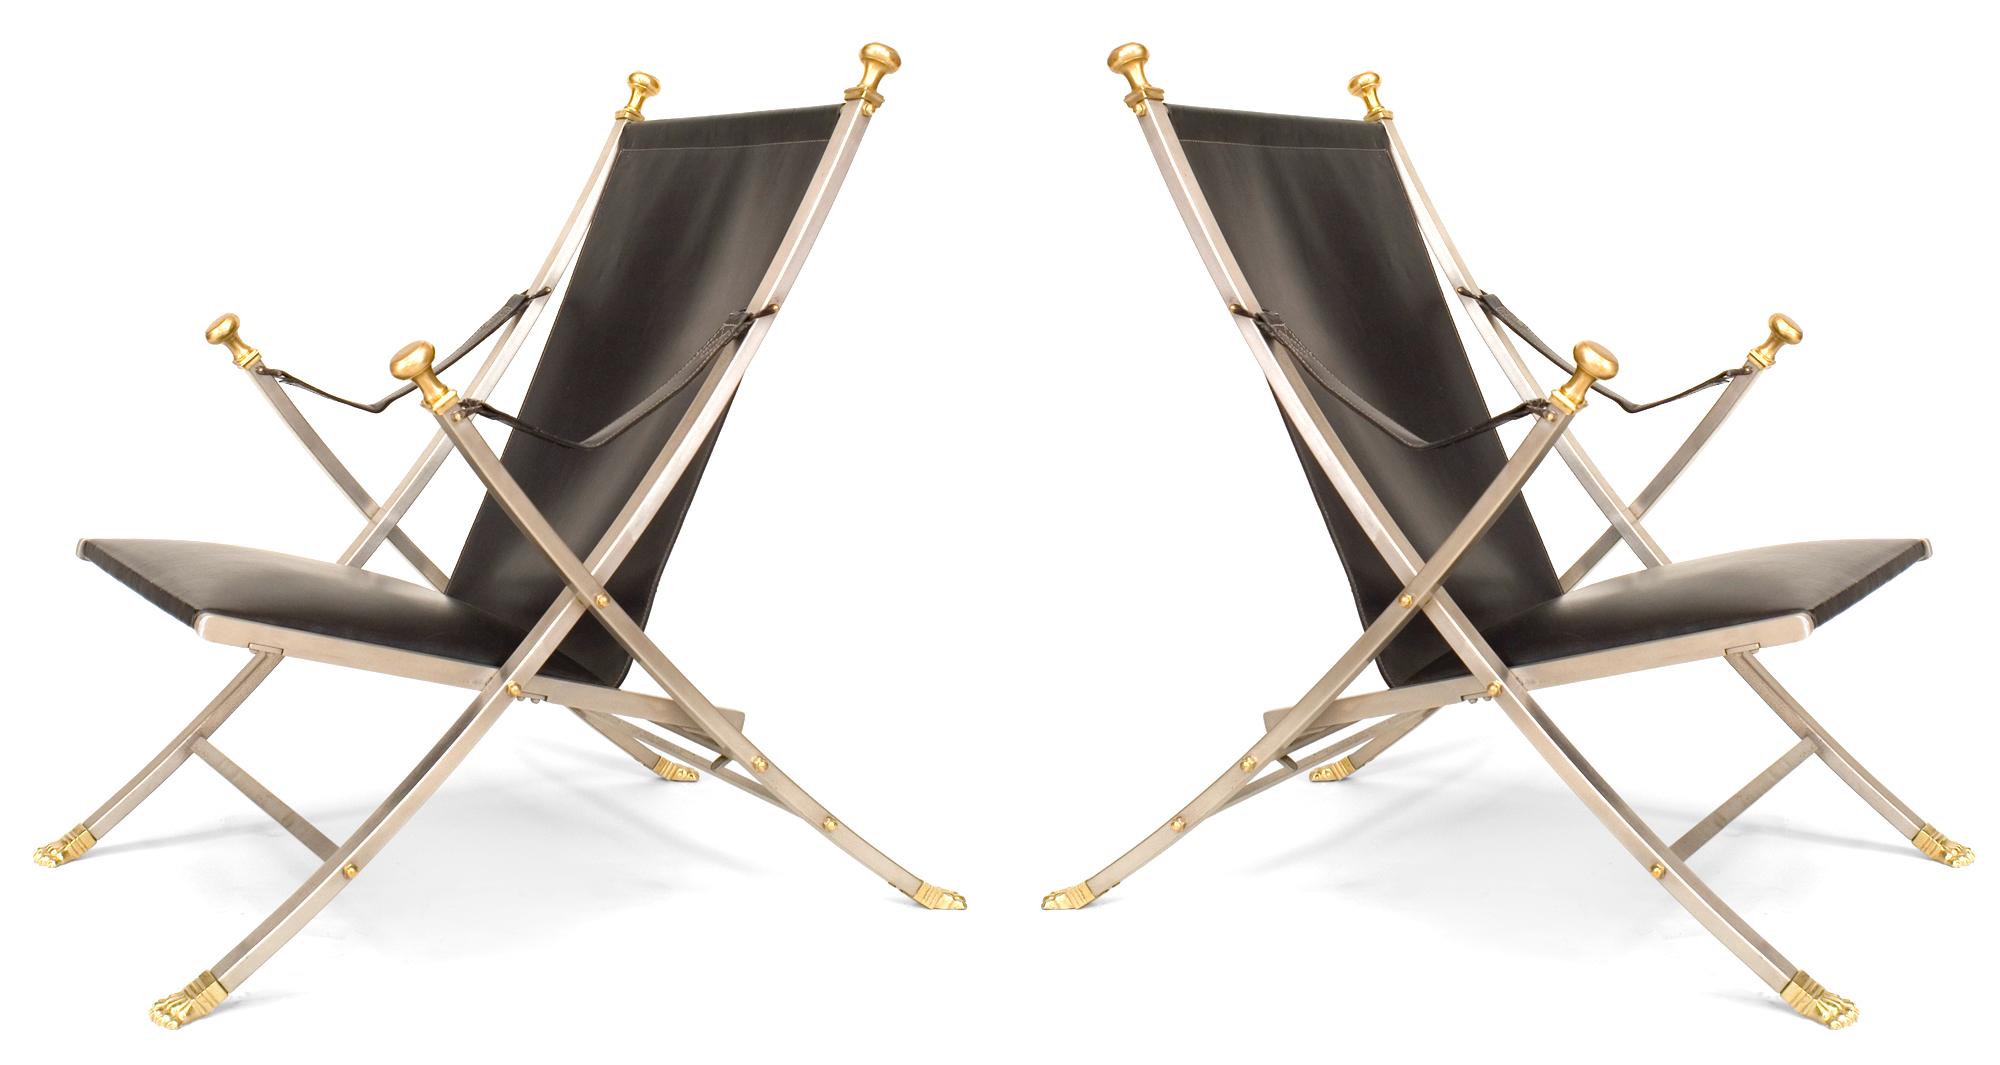 Pair of French Art Moderne (1940/50s) steel campaign Armchairs with brass claw feet and finials on back and arms with black leather seat and back (MAISON JANSEN) (Damaged on one of the straps)
